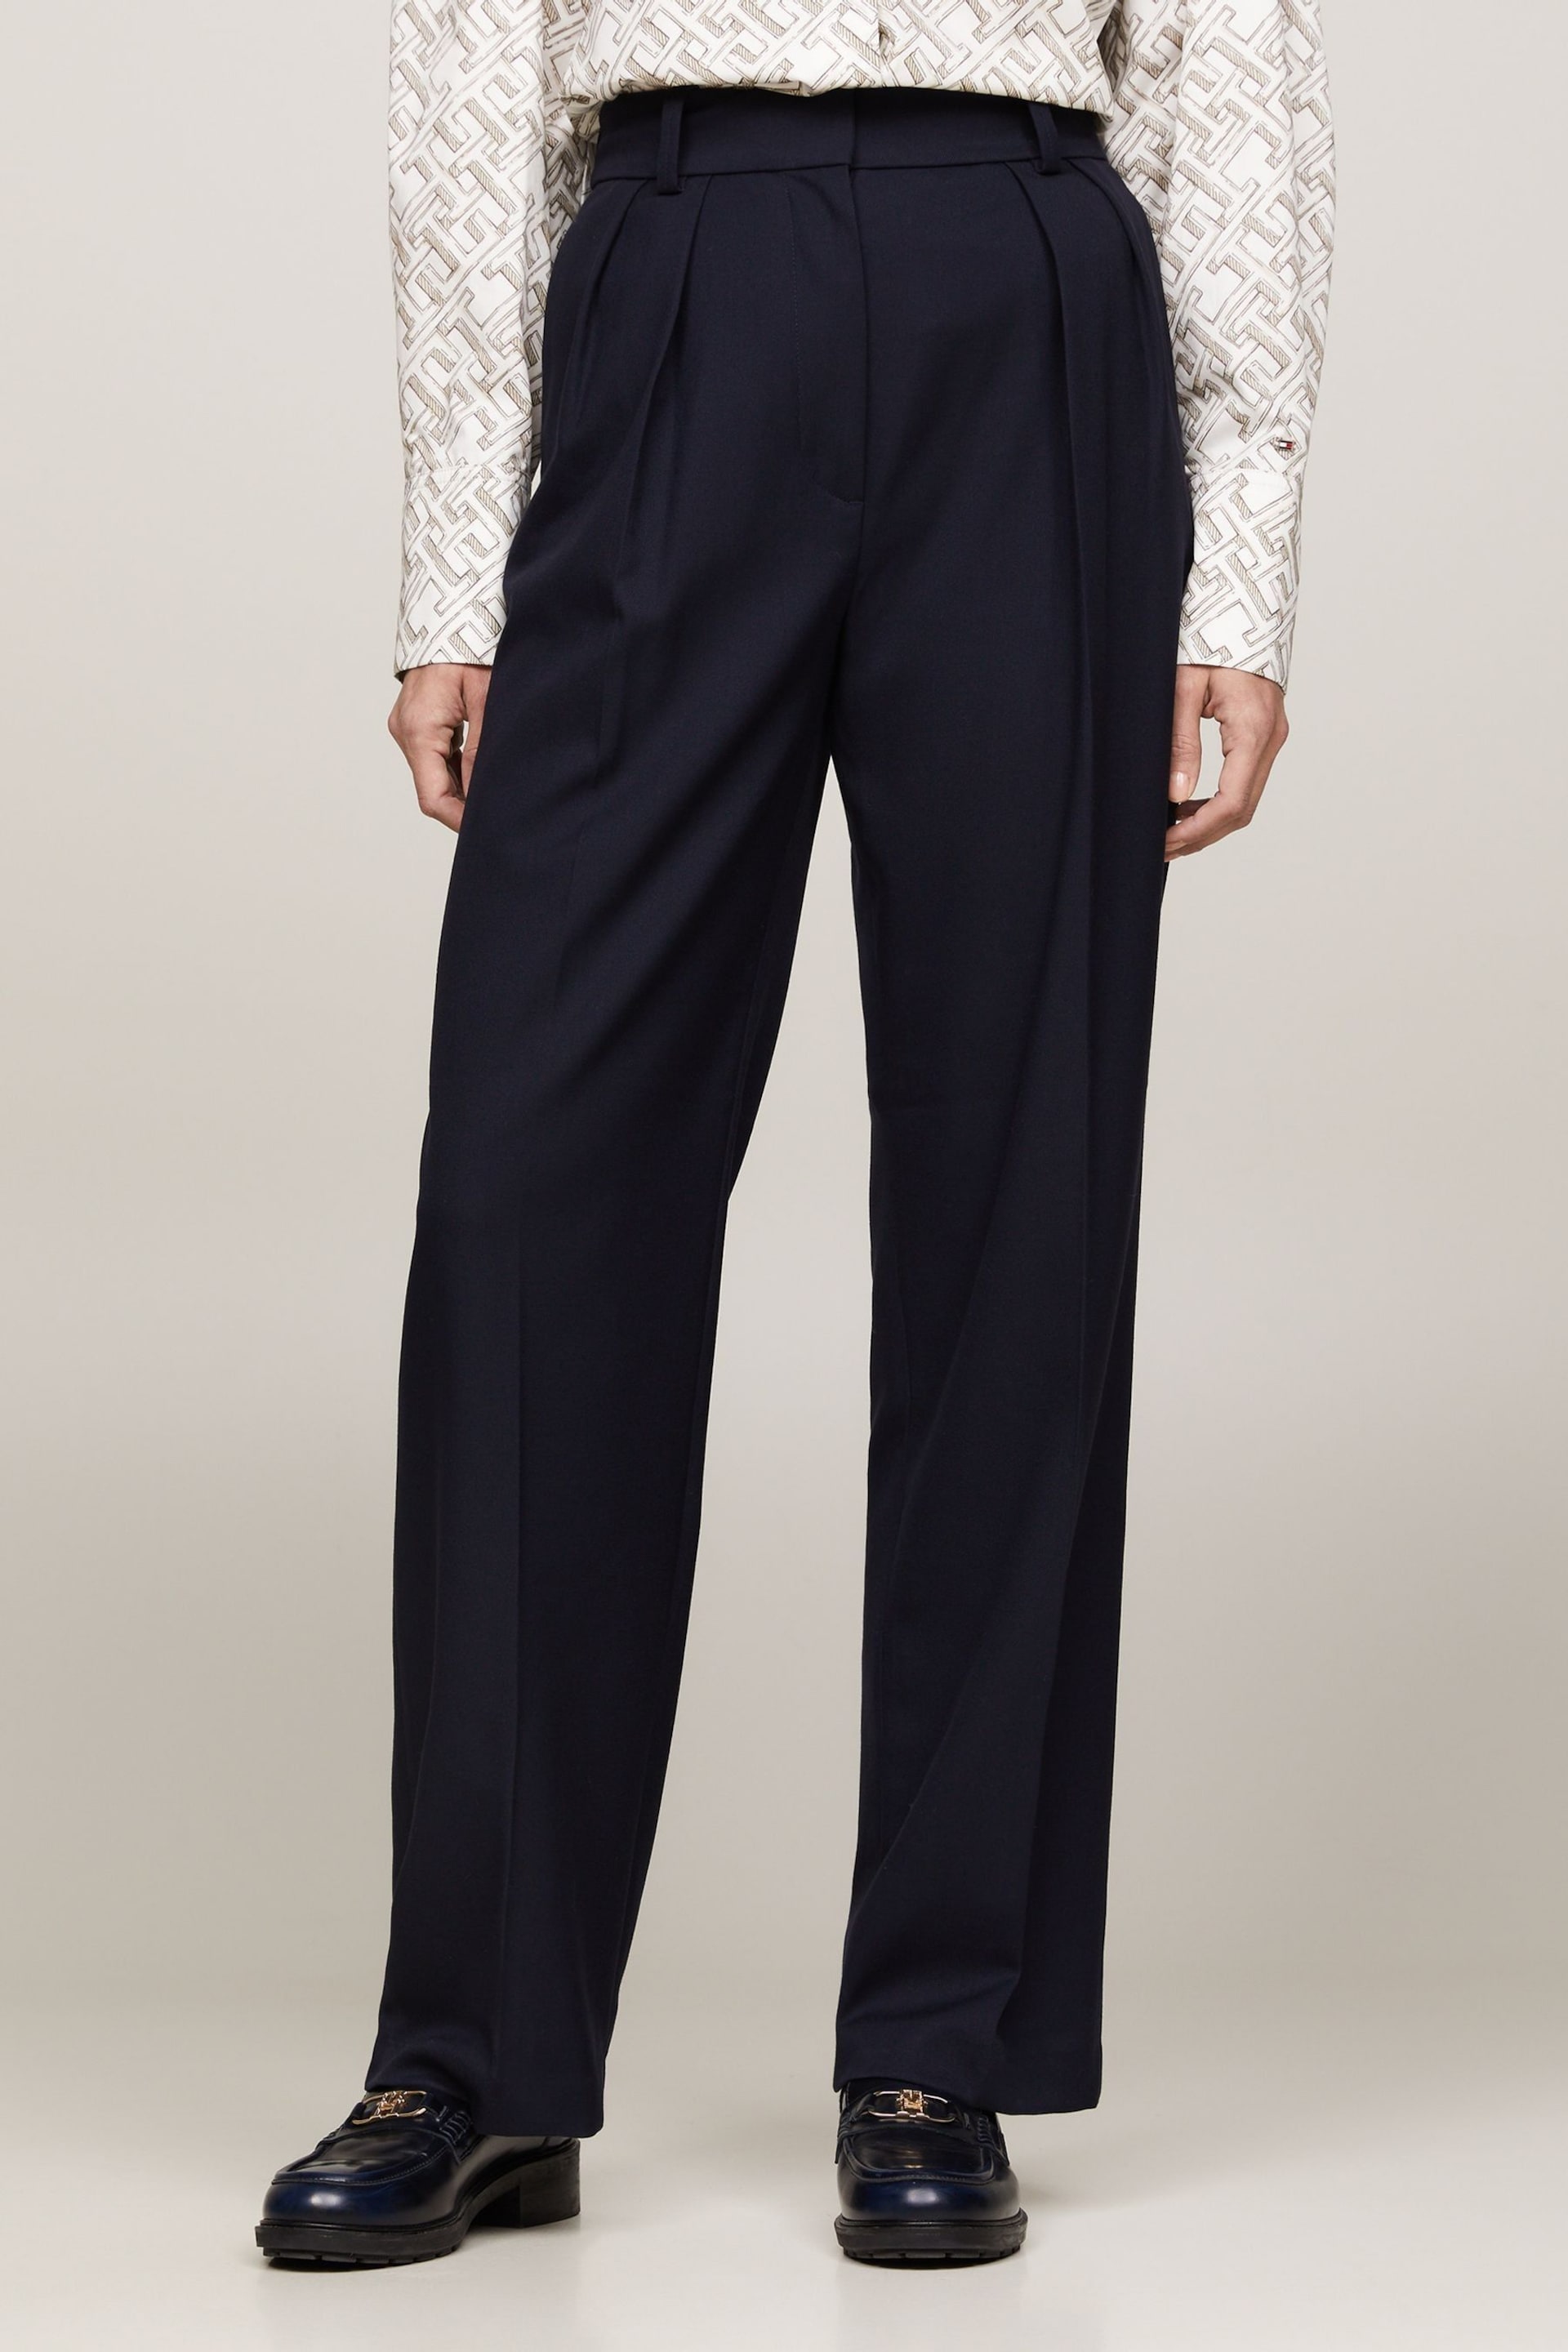 Tommy Hilfiger Relaxed Blue Straight Leg Trousers - Image 3 of 6